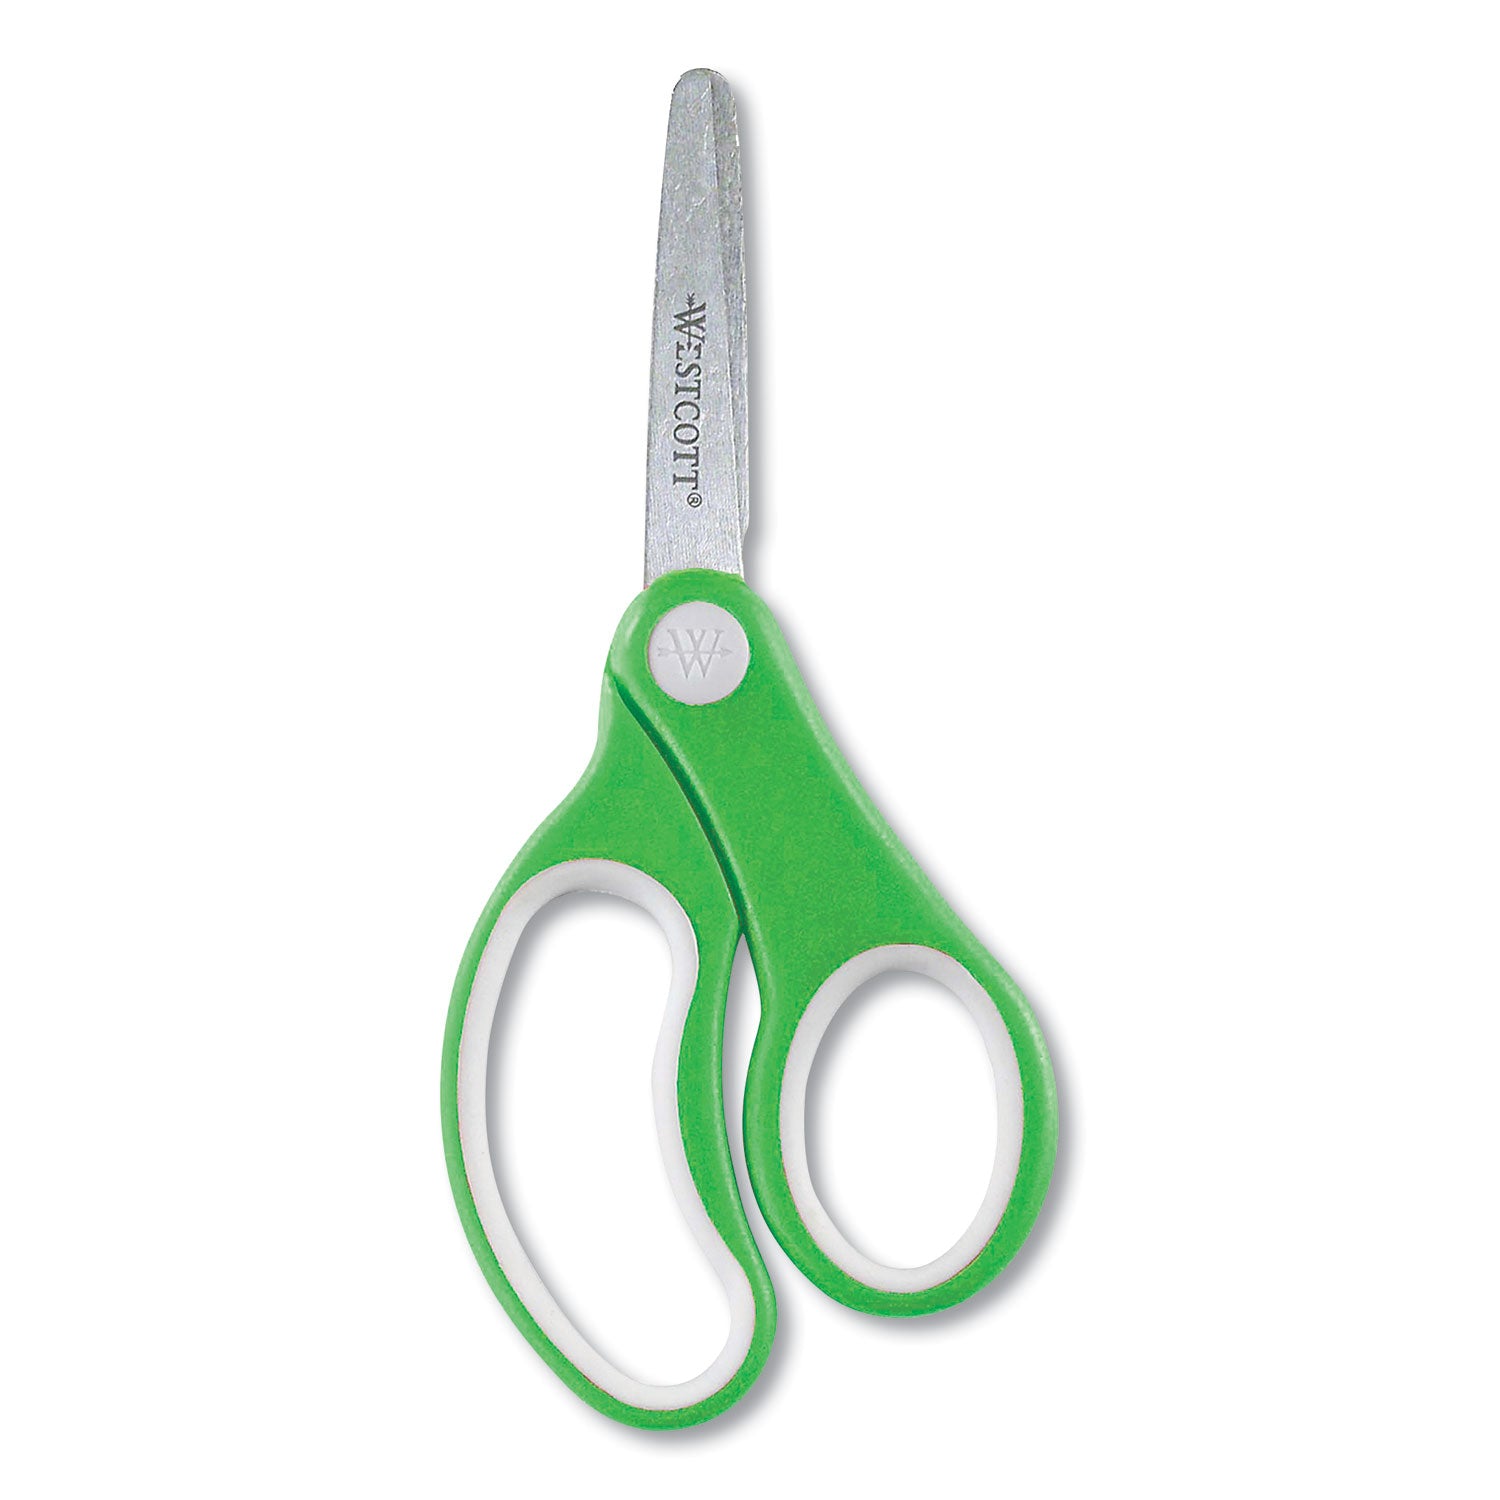 Soft Handle Kids Scissors, Rounded Tip, 5" Long, 1.75" Cut Length, Assorted Straight Handles, 12/Pack - 